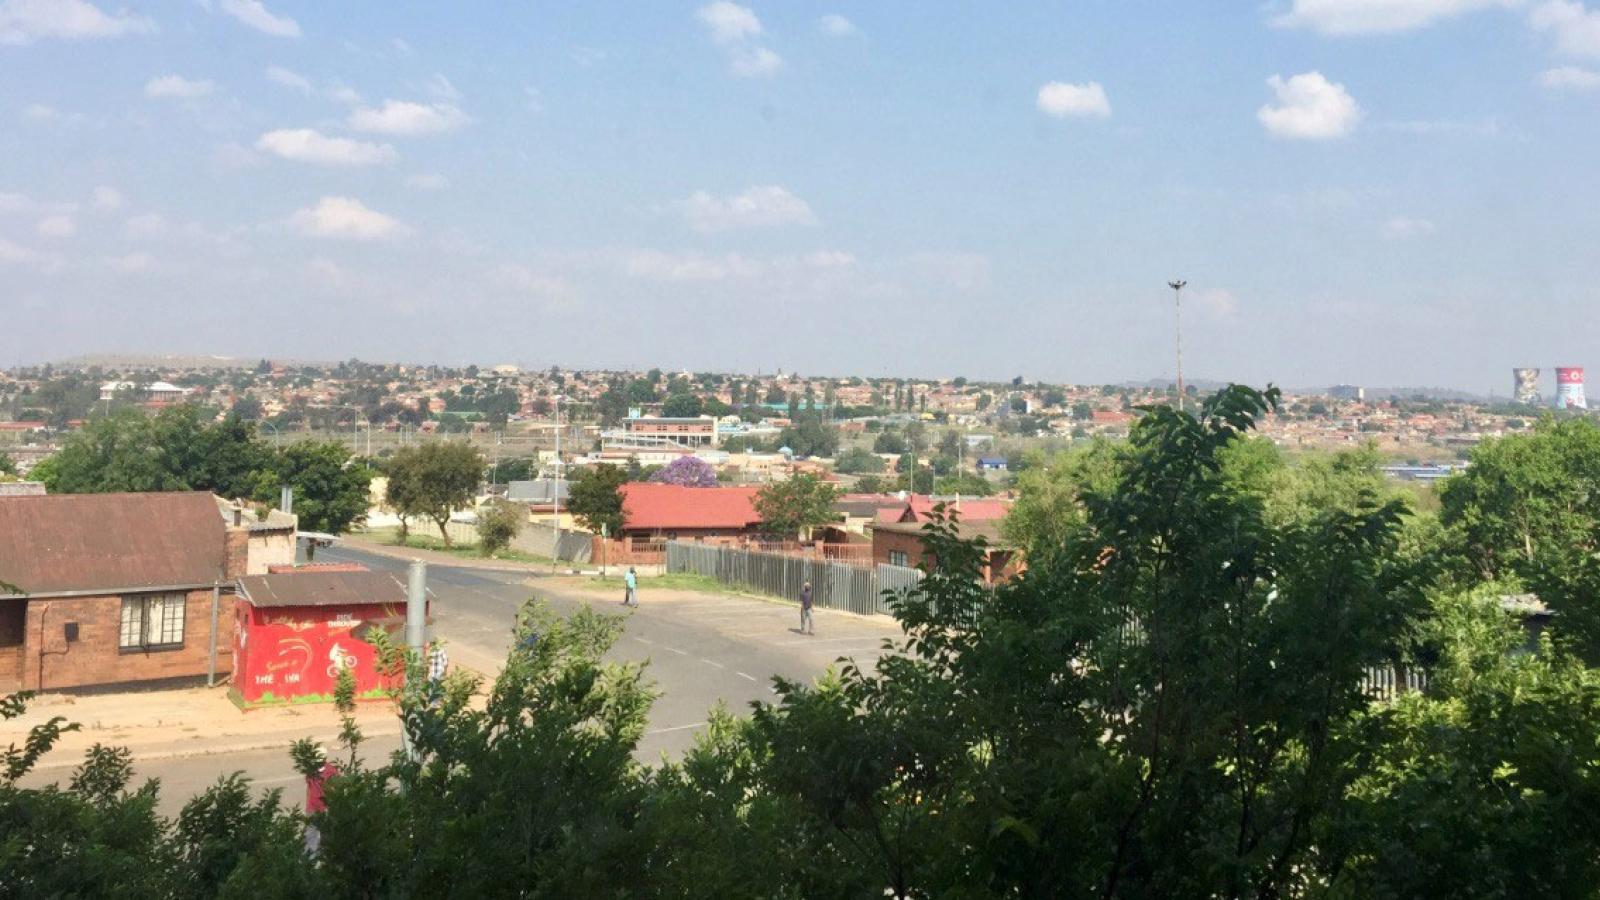 View across rooftops in Soweto, South Africa